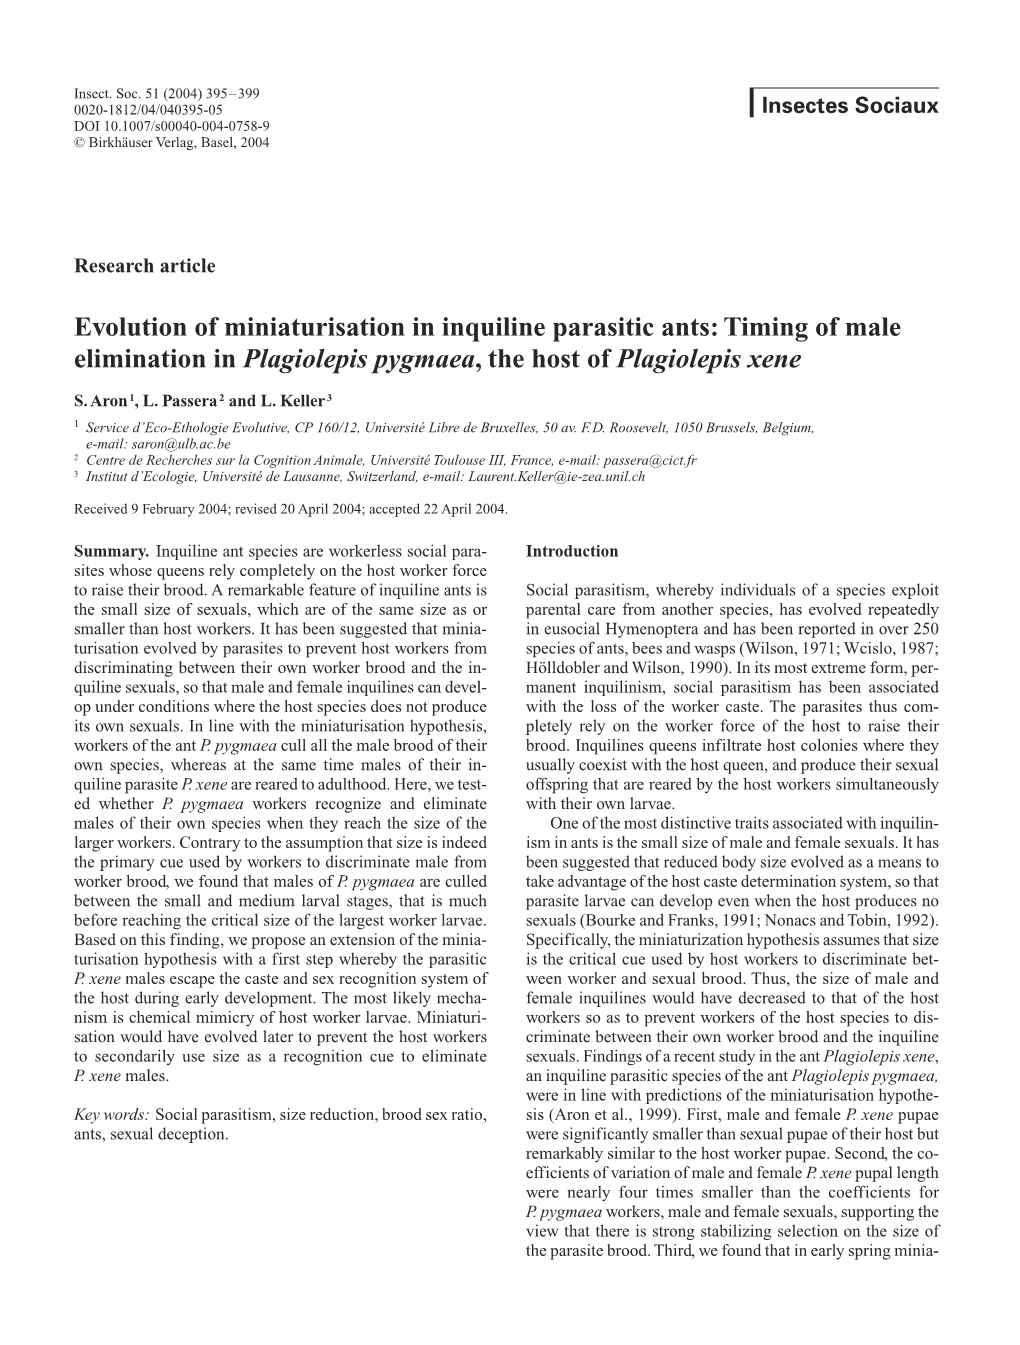 Evolution of Miniaturisation in Inquiline Parasitic Ants: Timing of Male Elimination in Plagiolepis Pygmaea, the Host of Plagiolepis Xene